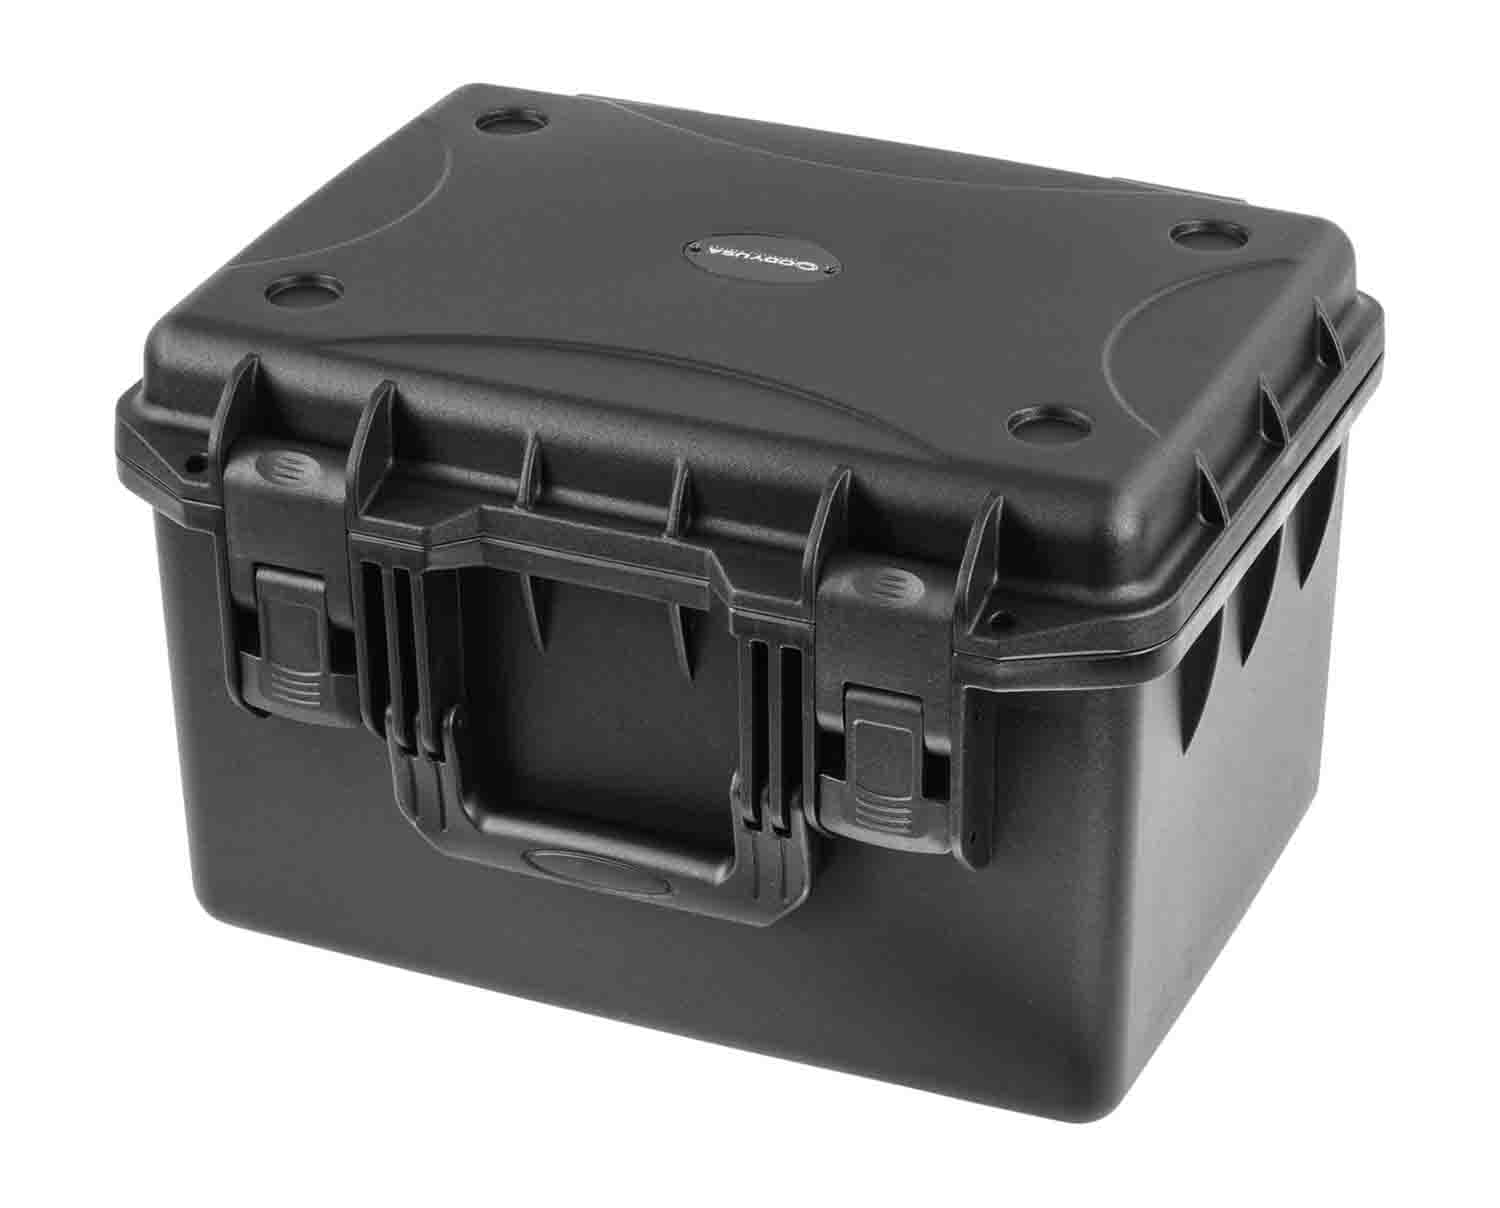 Odyssey VU151010NF Vulcan Injection-Molded Utility Case - 15 x 10.5 x 8.25" Interior - Hollywood DJ